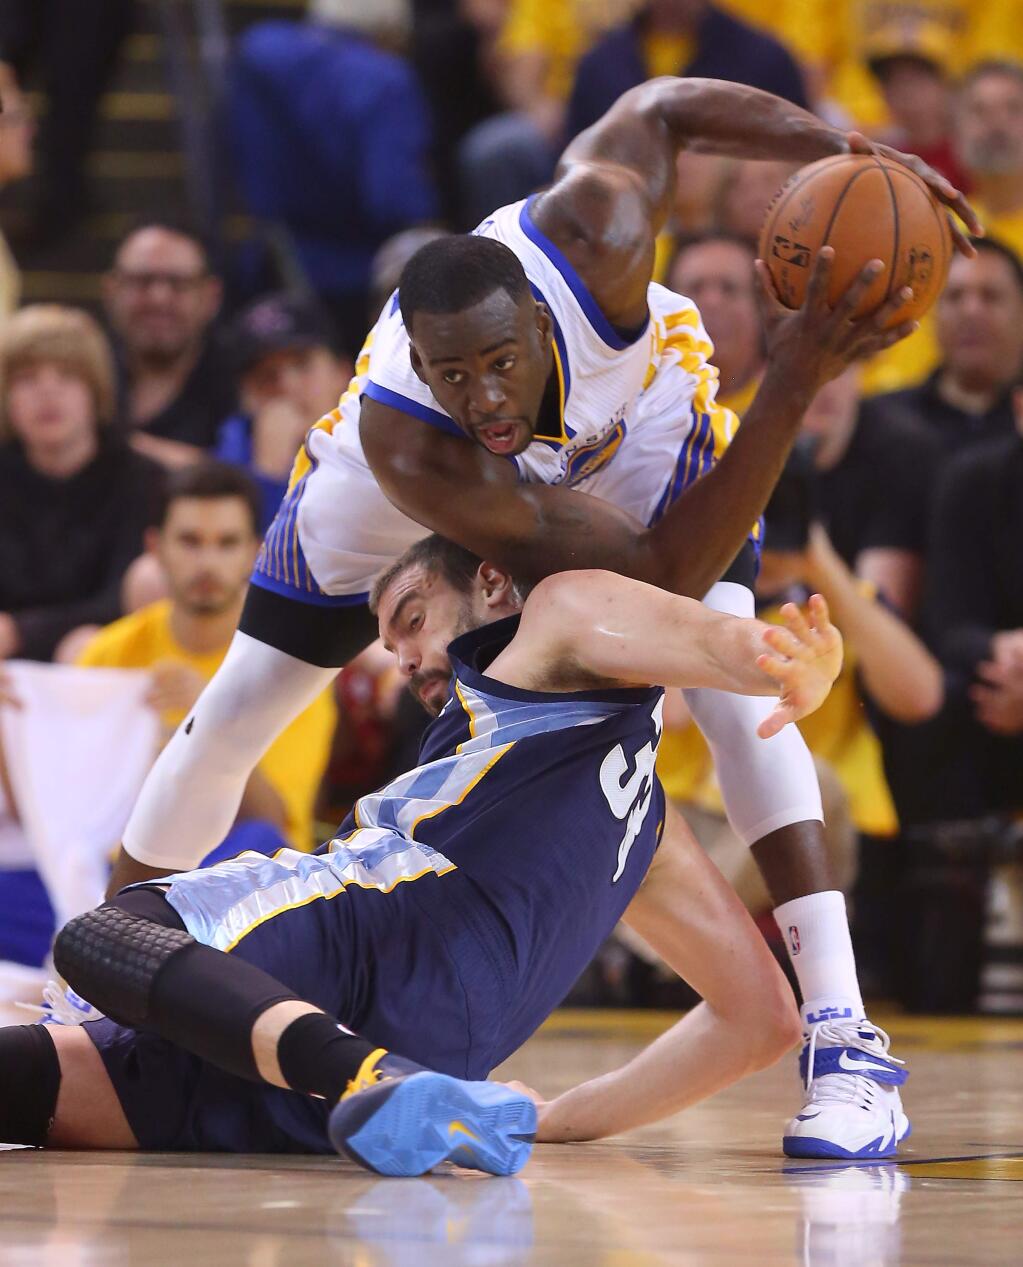 Golden State Warriors forward Draymond Green grabs a loose ball away from Memphis Grizzlies center Marc Gasol during Game 1 of the NBA Playoffs Western Conference Semifinals at Oracle Arena, in Oakland on Sunday, May 3, 2015. (Christopher Chung/ The Press Democrat)